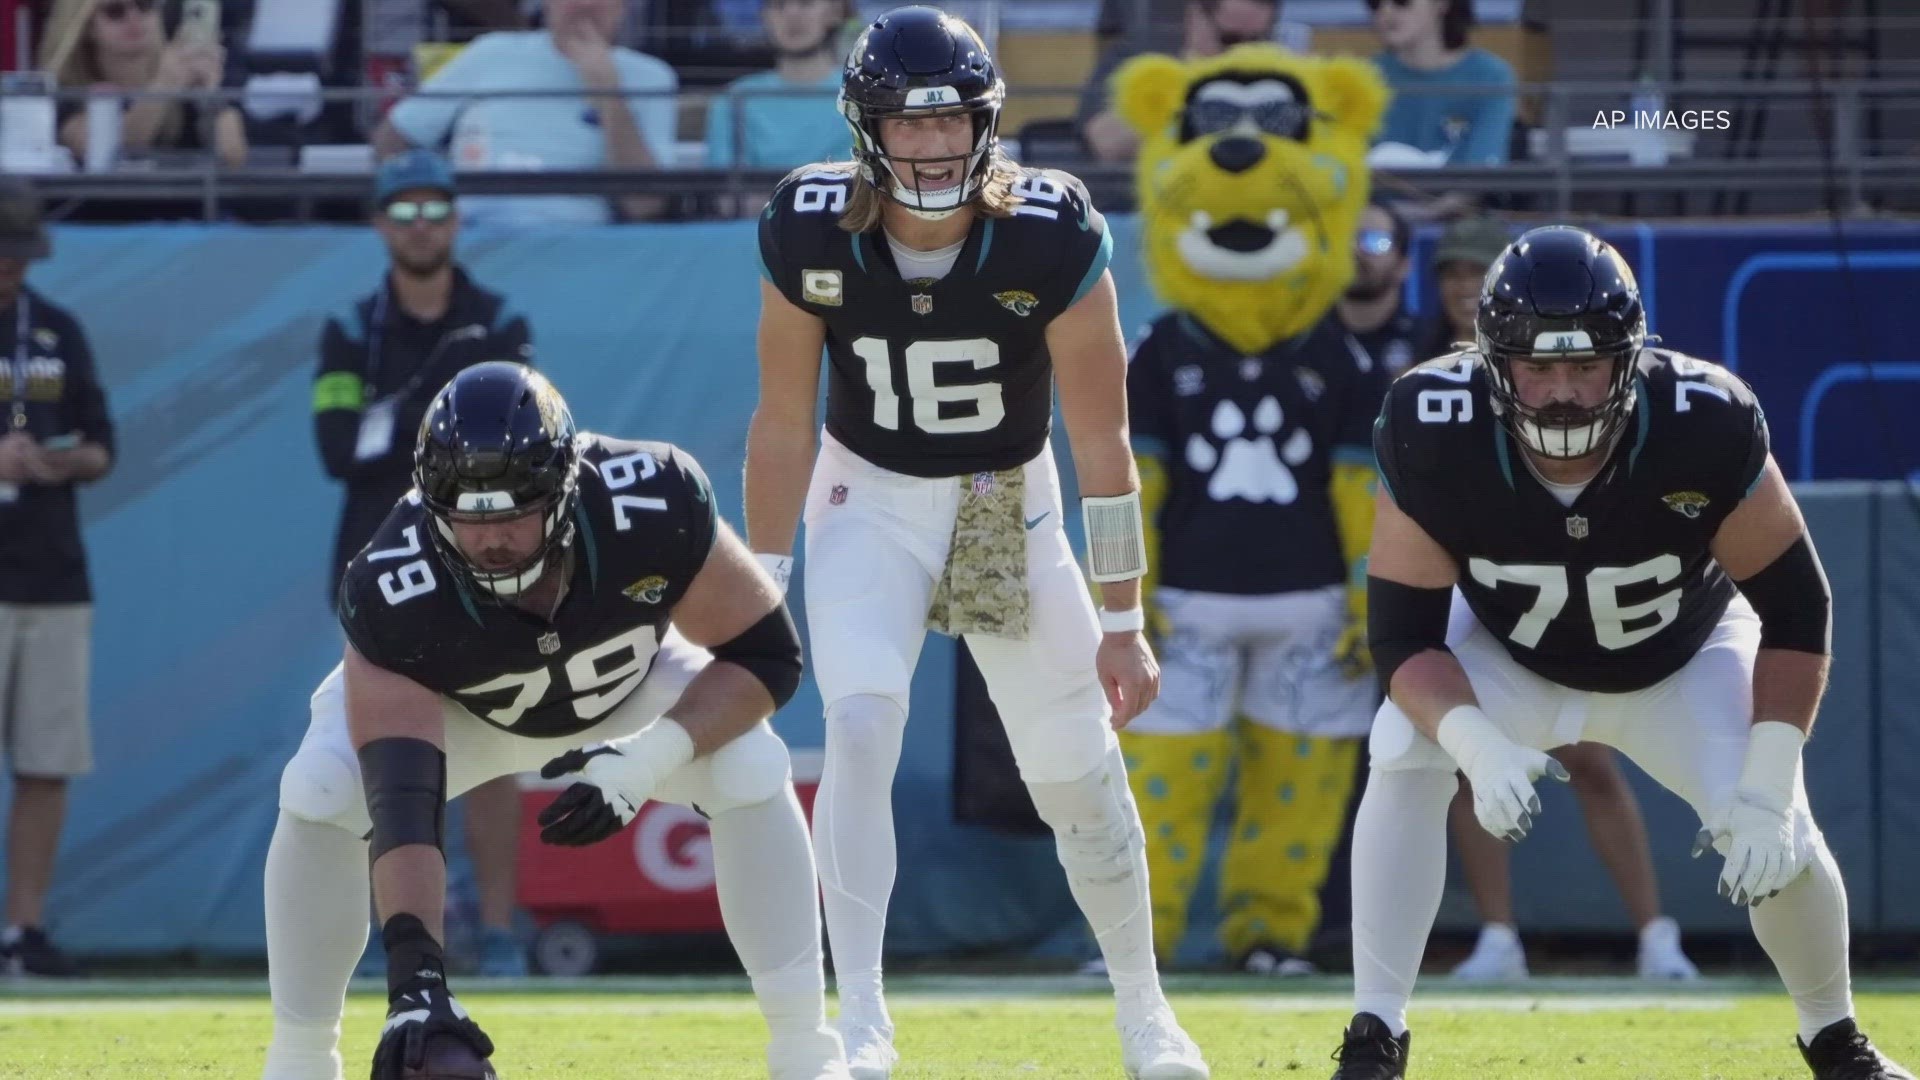 With Tyler Shatley, Ezra Cleveland, and Mitch Morse solidifying their positions, maintaining player health remains a primary focus for the Jaguars.